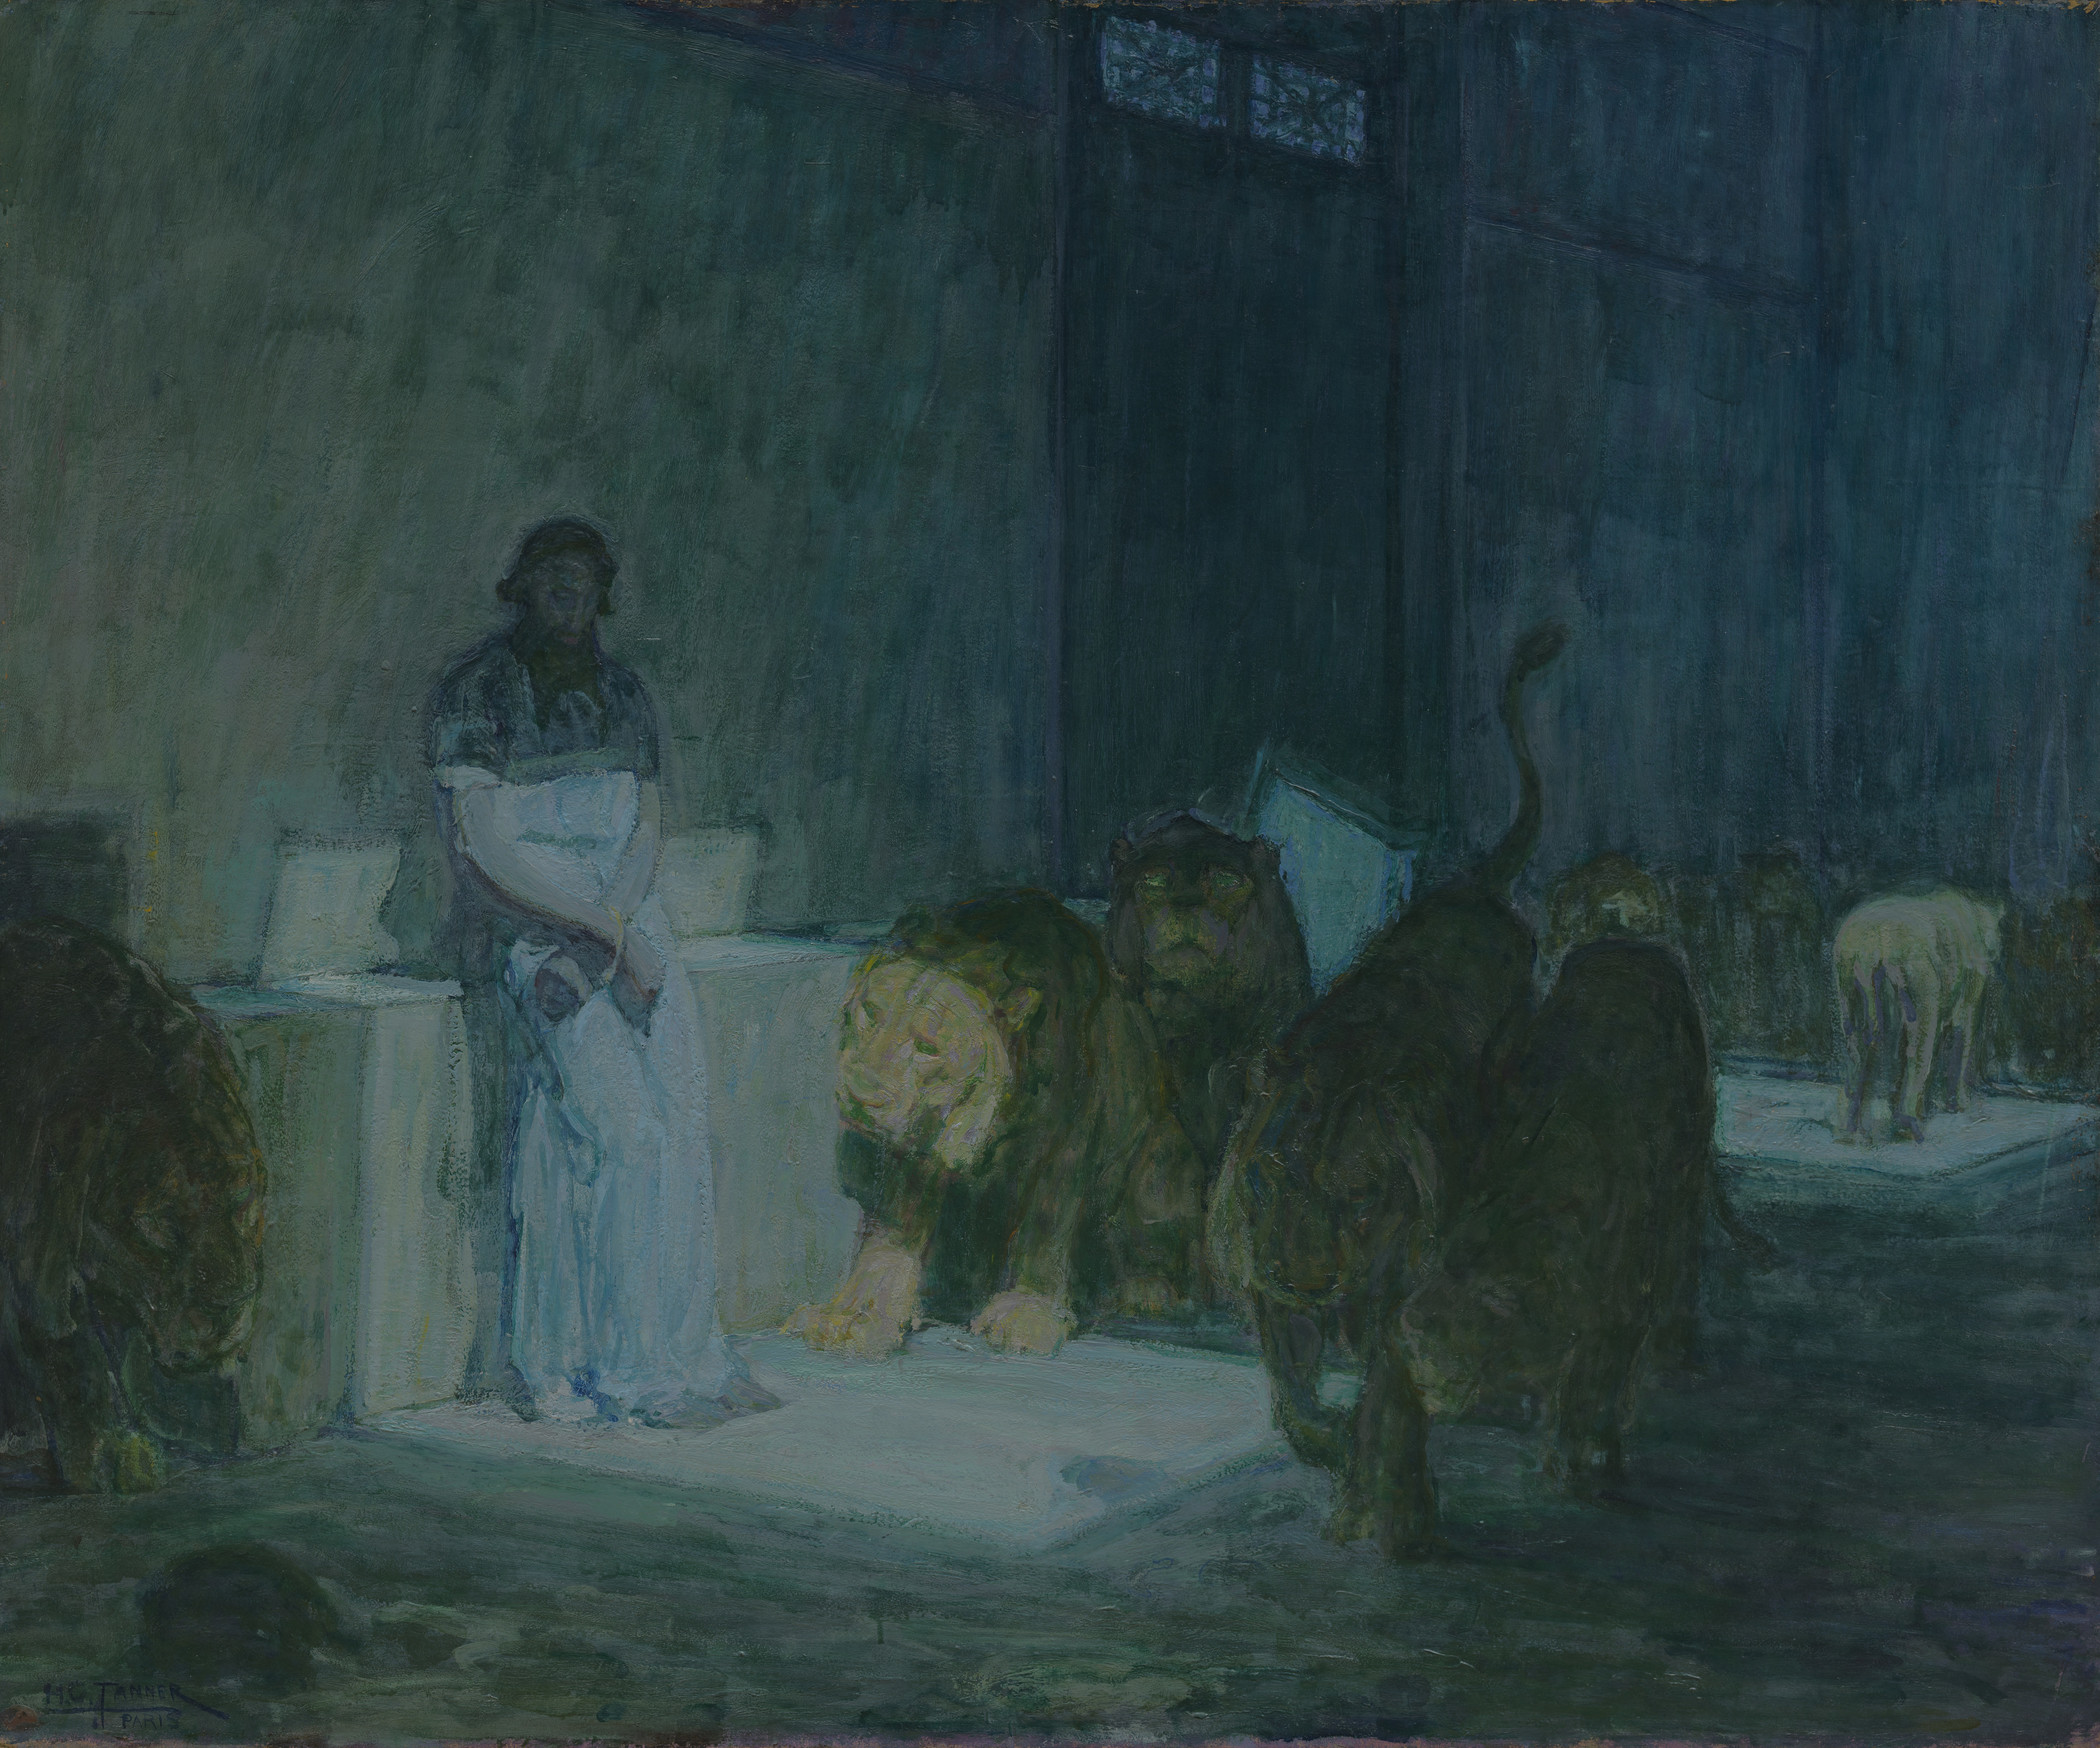 Daniel in the Lions' Den by Henry Ossawa Tanner - 1907-1918 - 104.46 x 126.8 cm LACMA, Los Angeles County Museum of Art